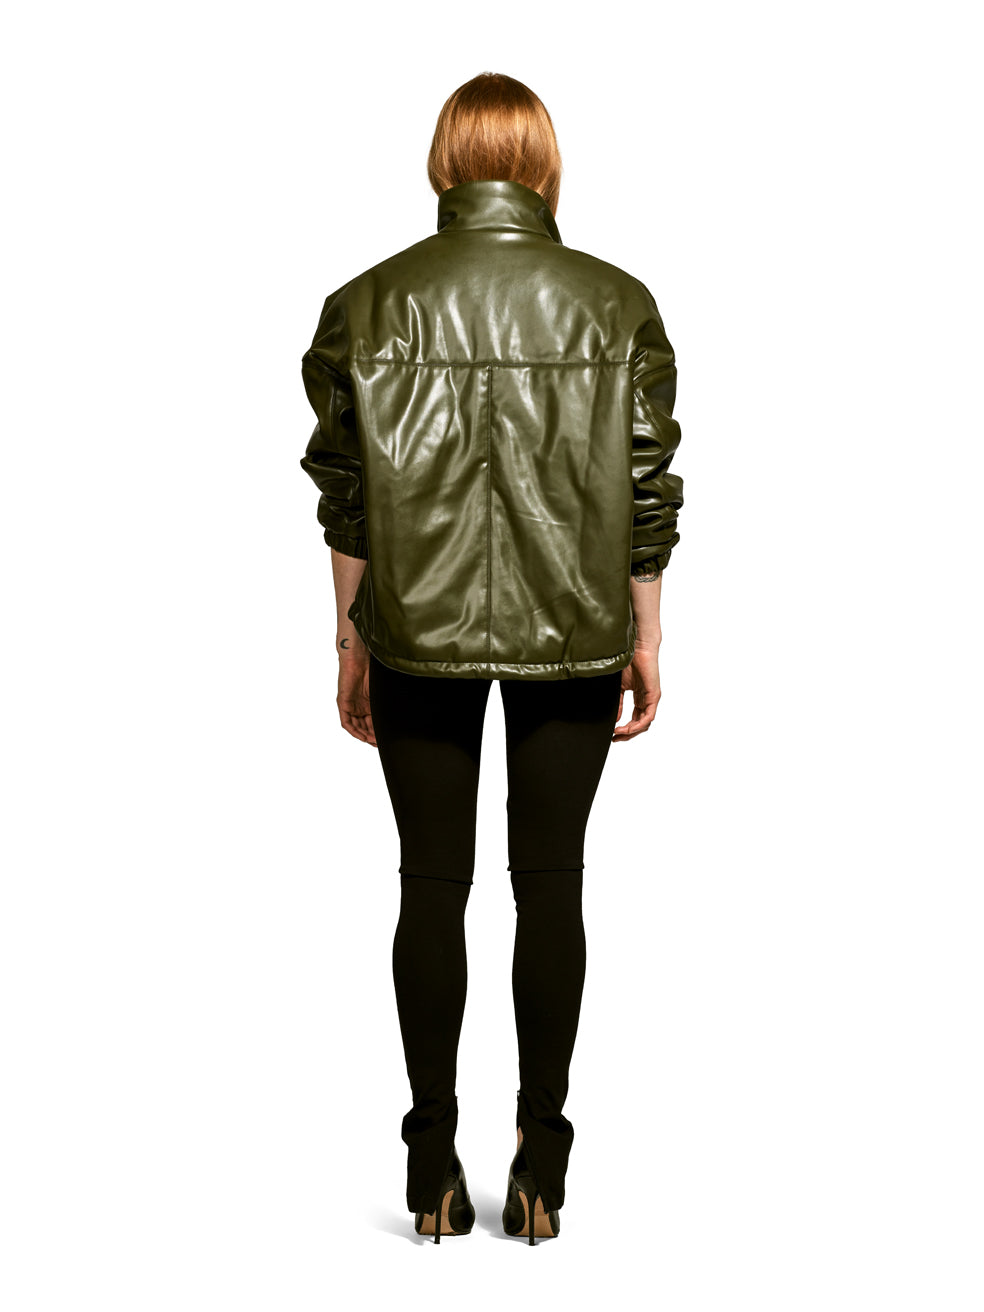 Billy Olive Green Conscious Fashion Winter Coat Cropped Made in Canada Vegan Leather Bomber